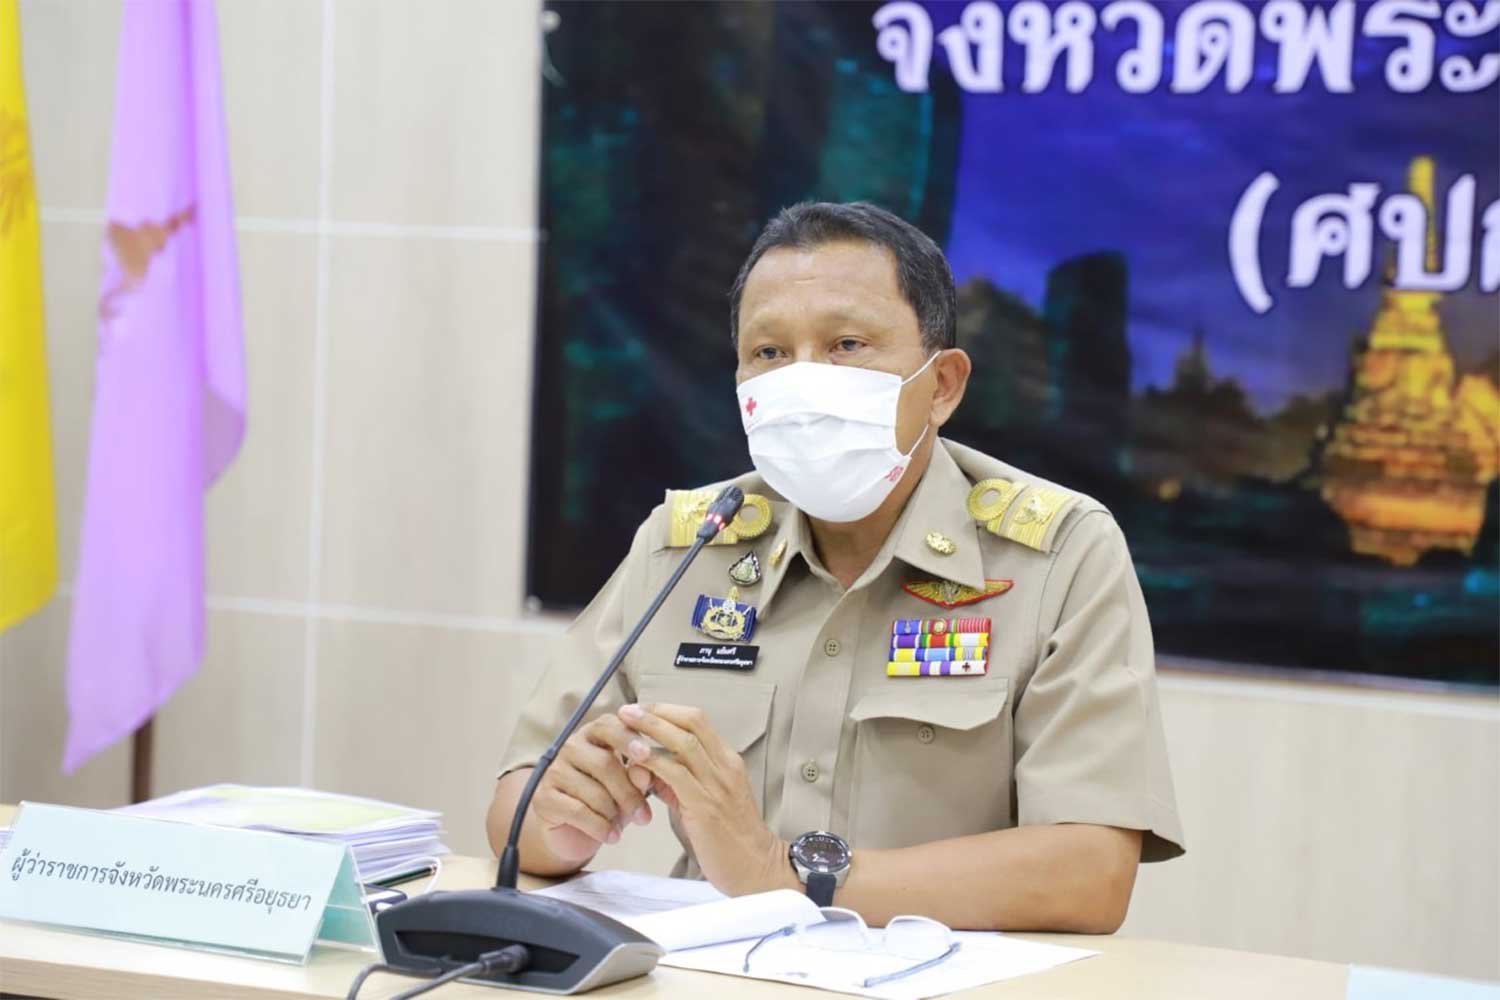 Ayutthaya governor Panu Yaemsri on Friday announes that spas and traditional Thai massage outlets will be alloed to resume busness from Jan 26 under conditions set by health authorities. (Photo: Sunthorn Pongpao)